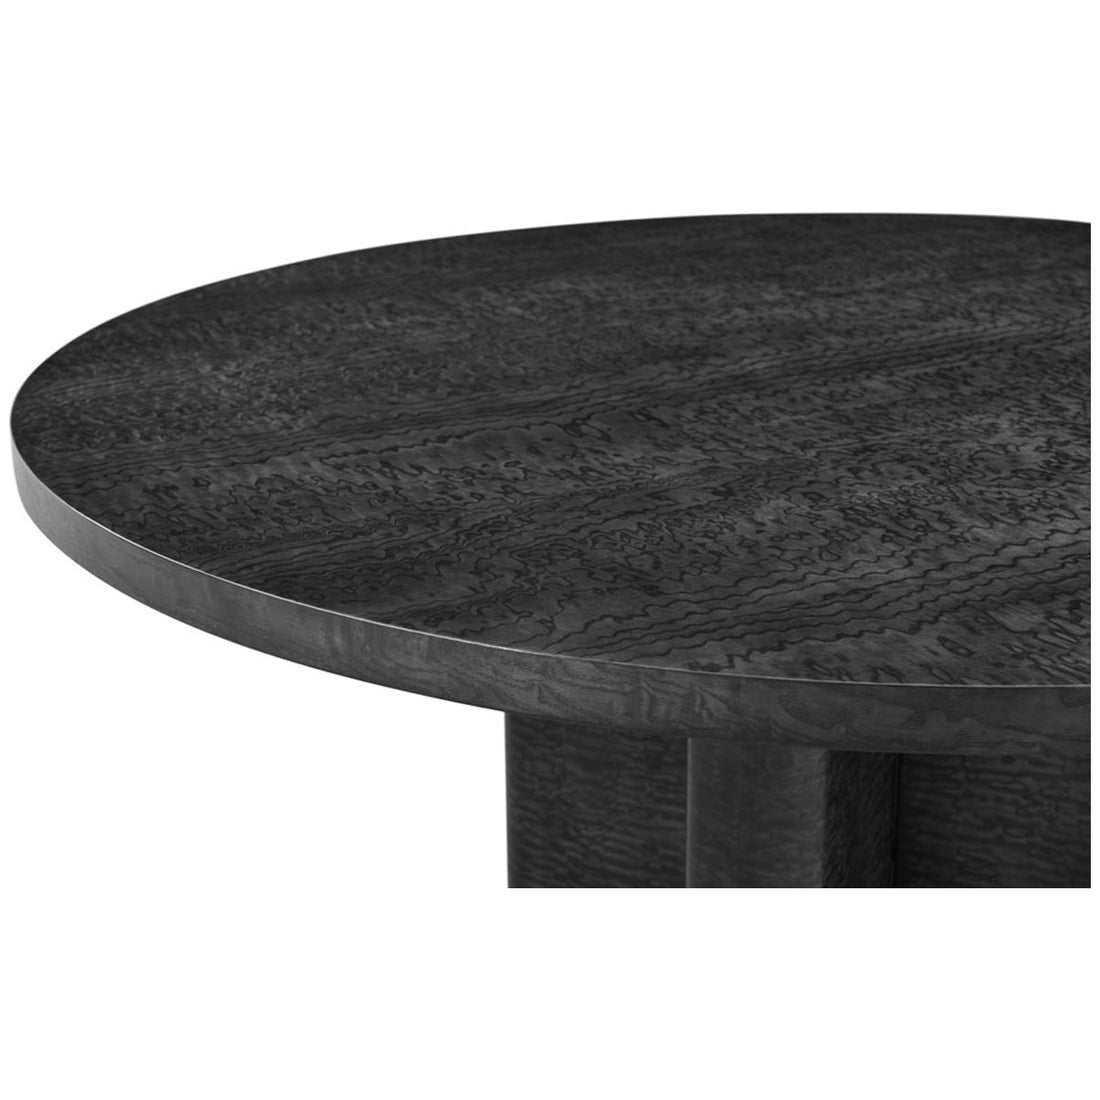 Theodore Alexander Kesden Round Dining Table